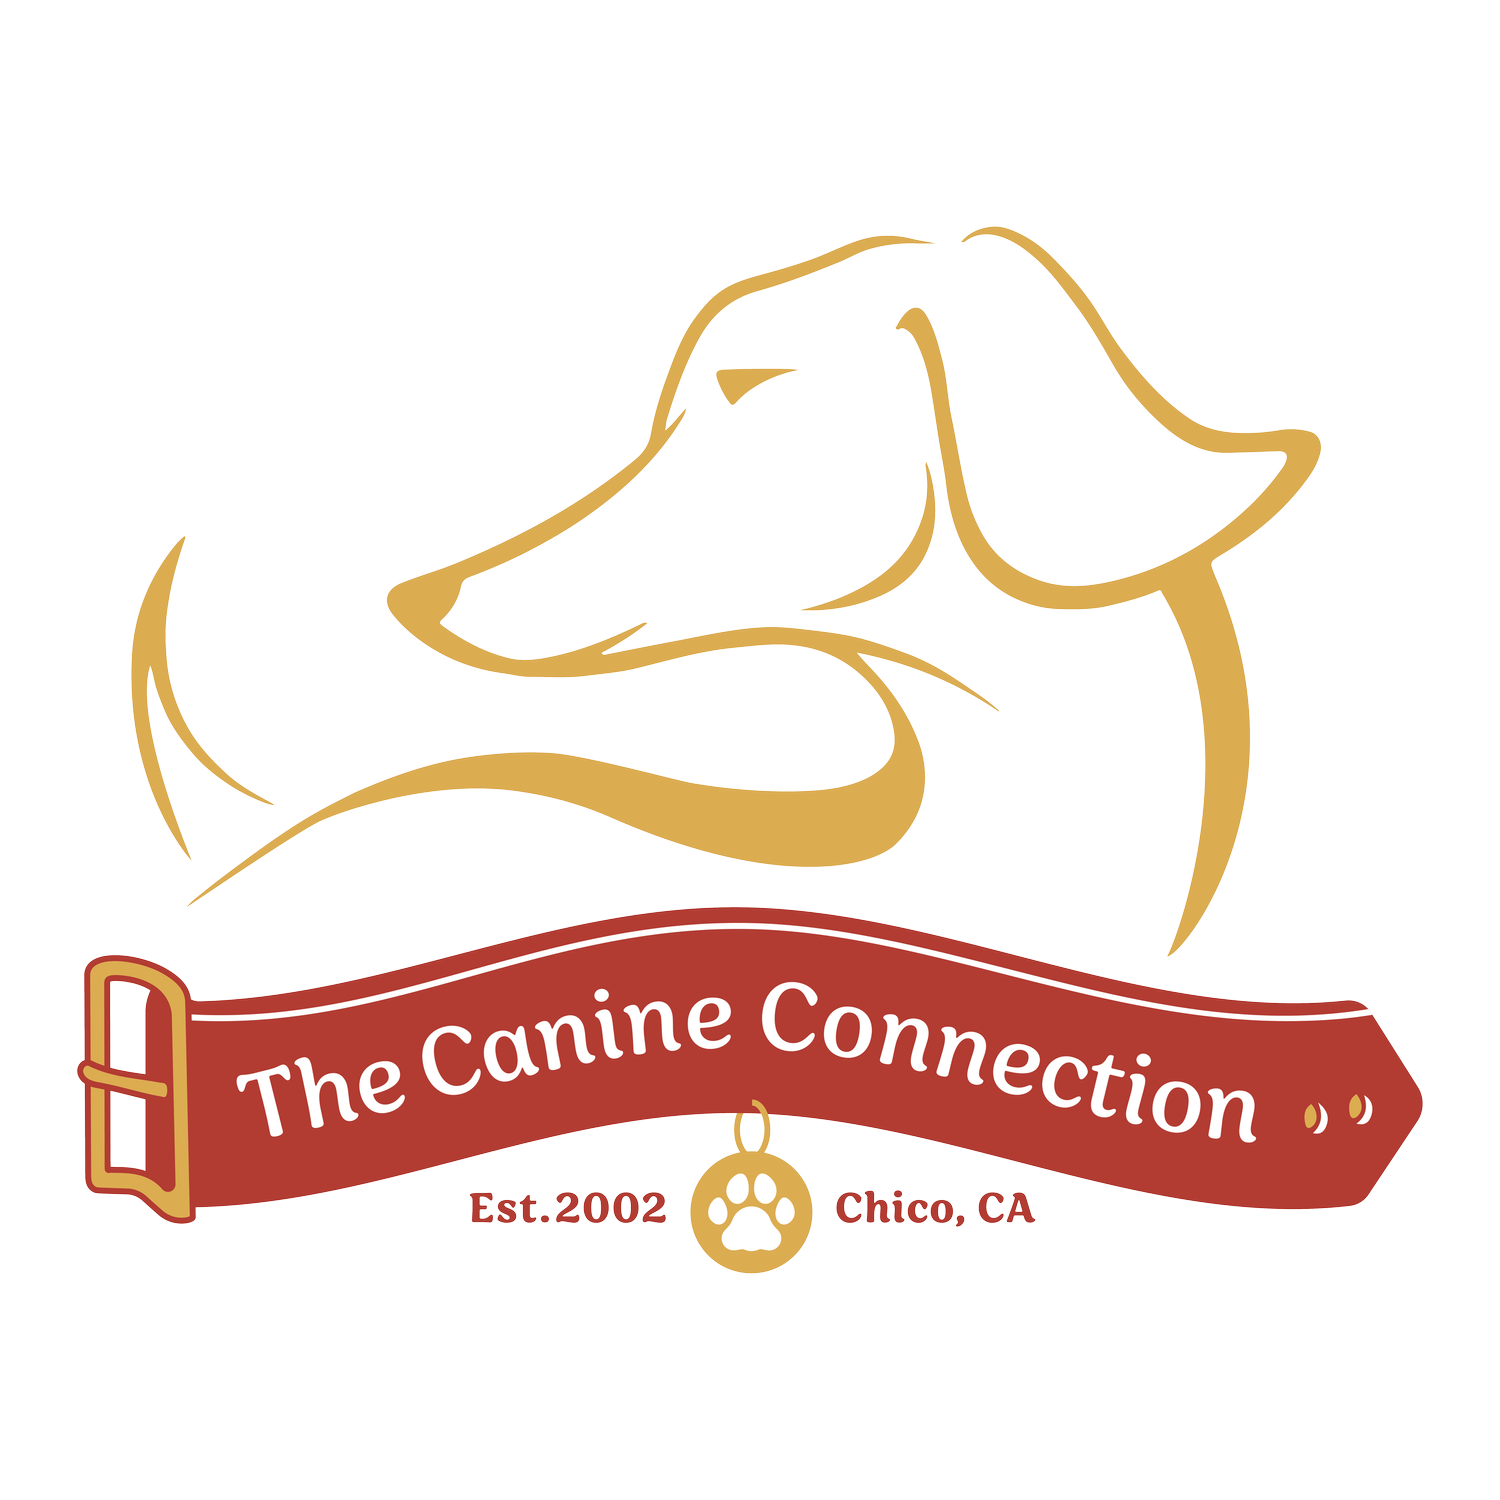 The Canine Connection, LLC